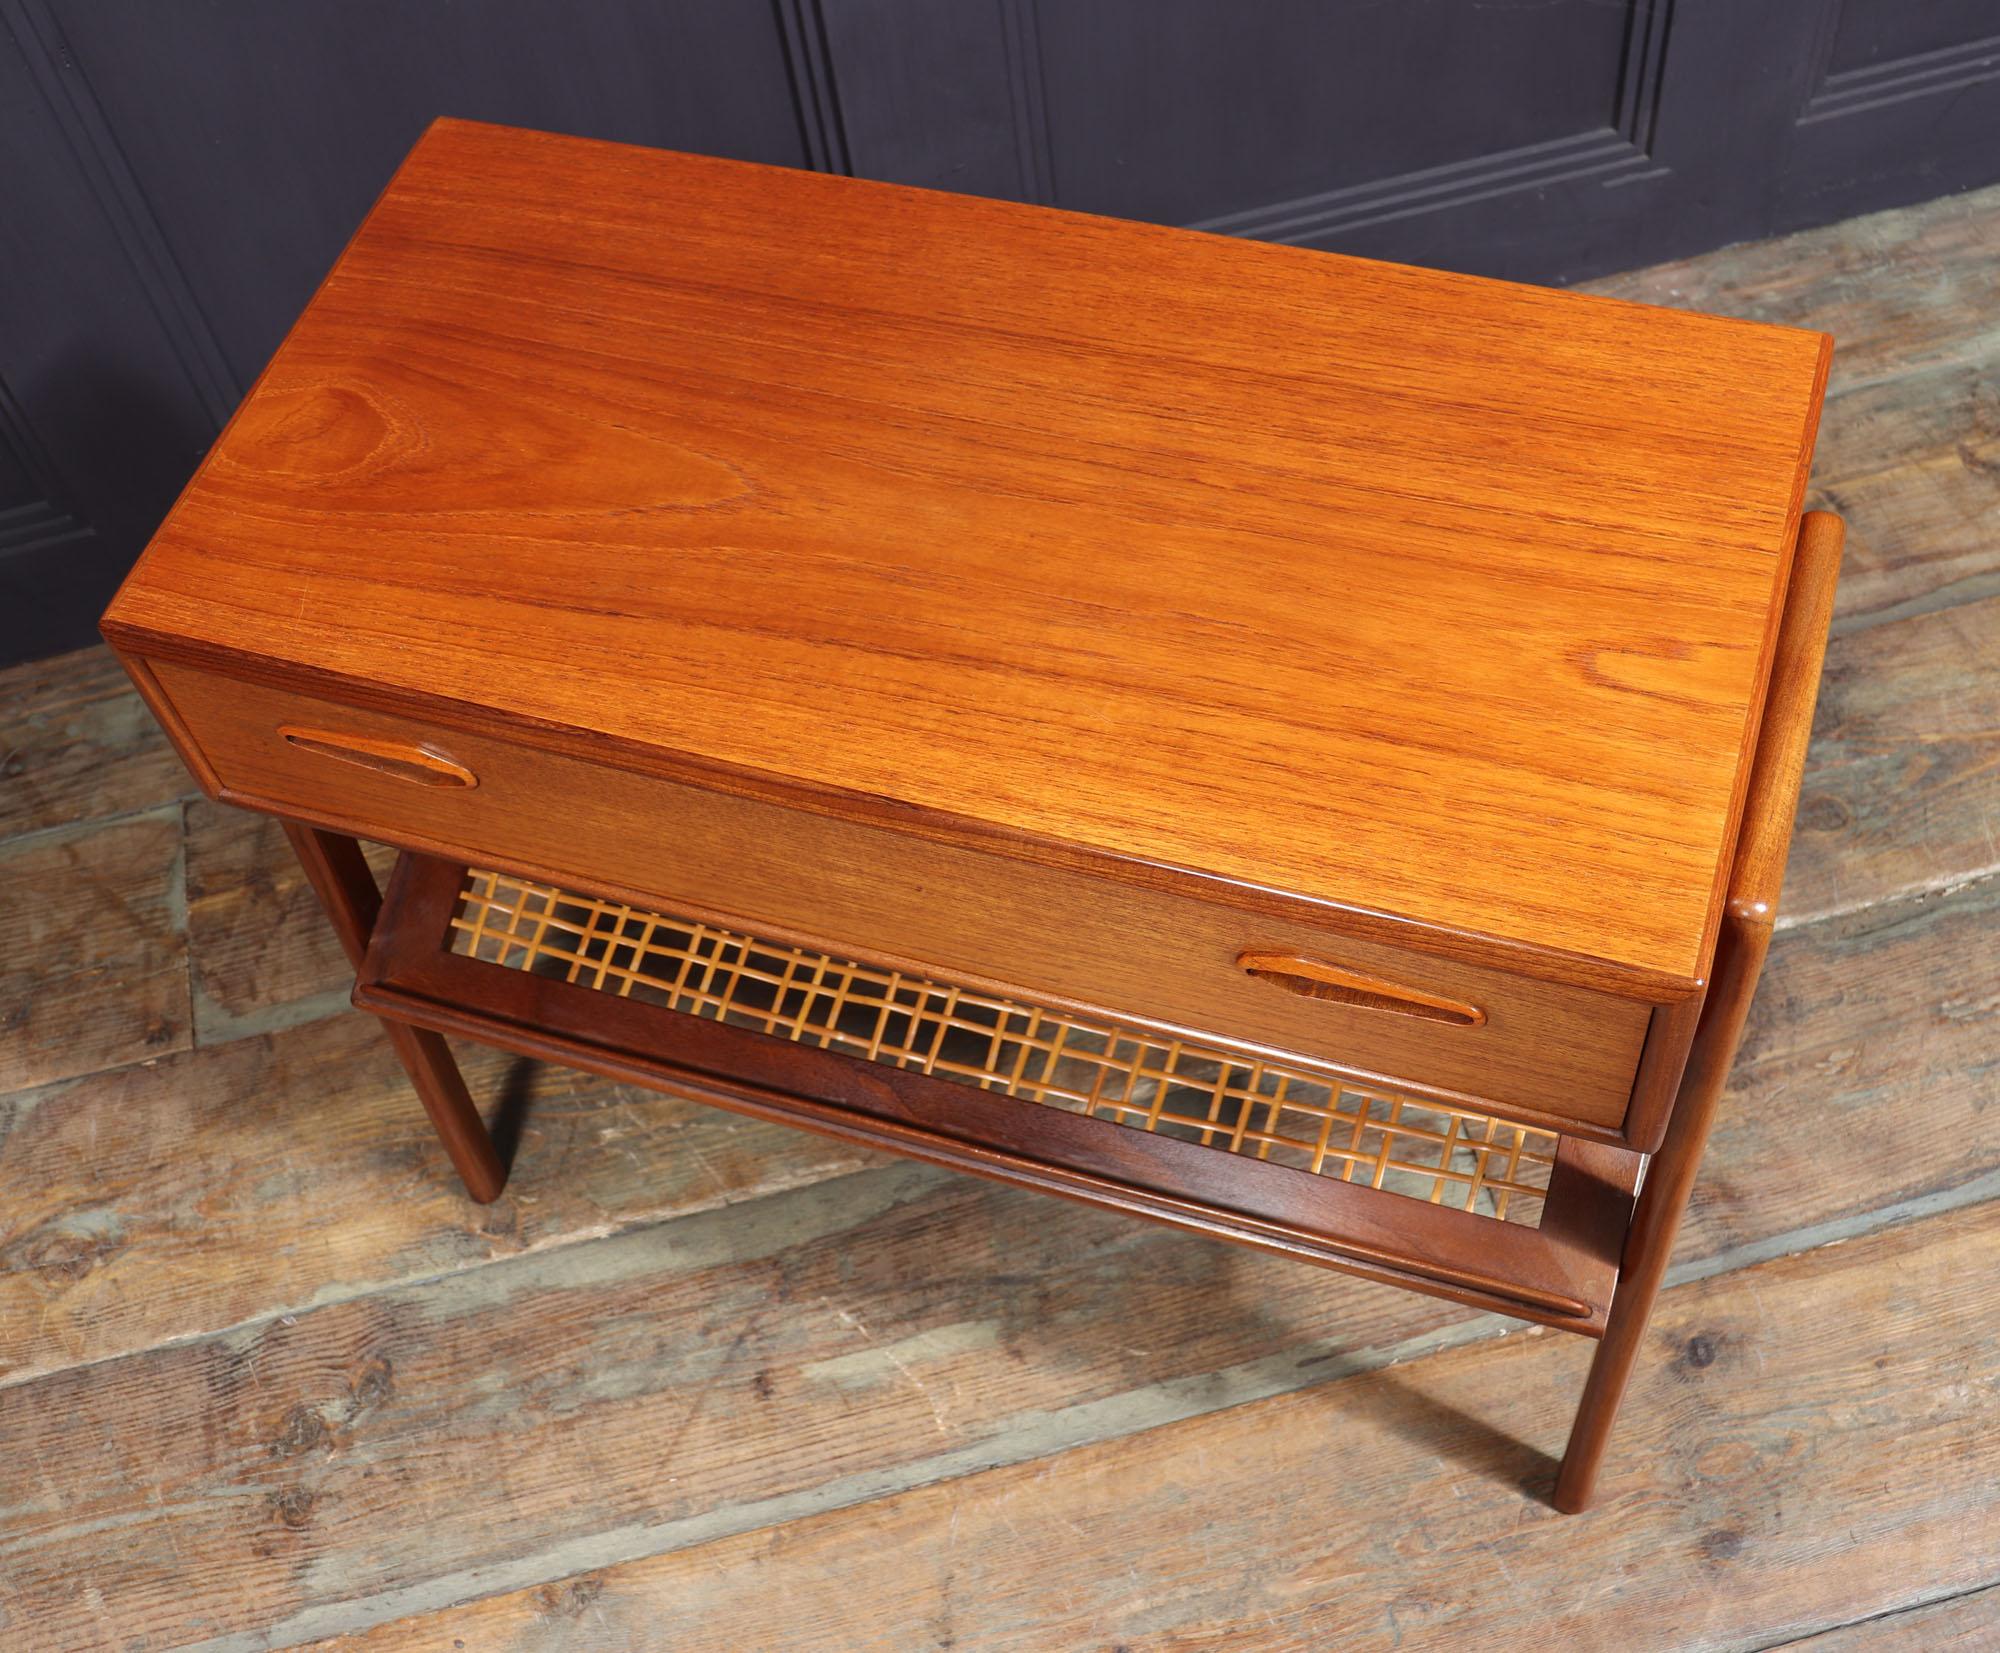 A Mid century Danish Modern entrance console / side table in teak, one long drawer with two inset sculpted handles and slanted lower shelf with woven split cane, in excellent vintage condition with minor restorations, small break in cane-work.
Age: